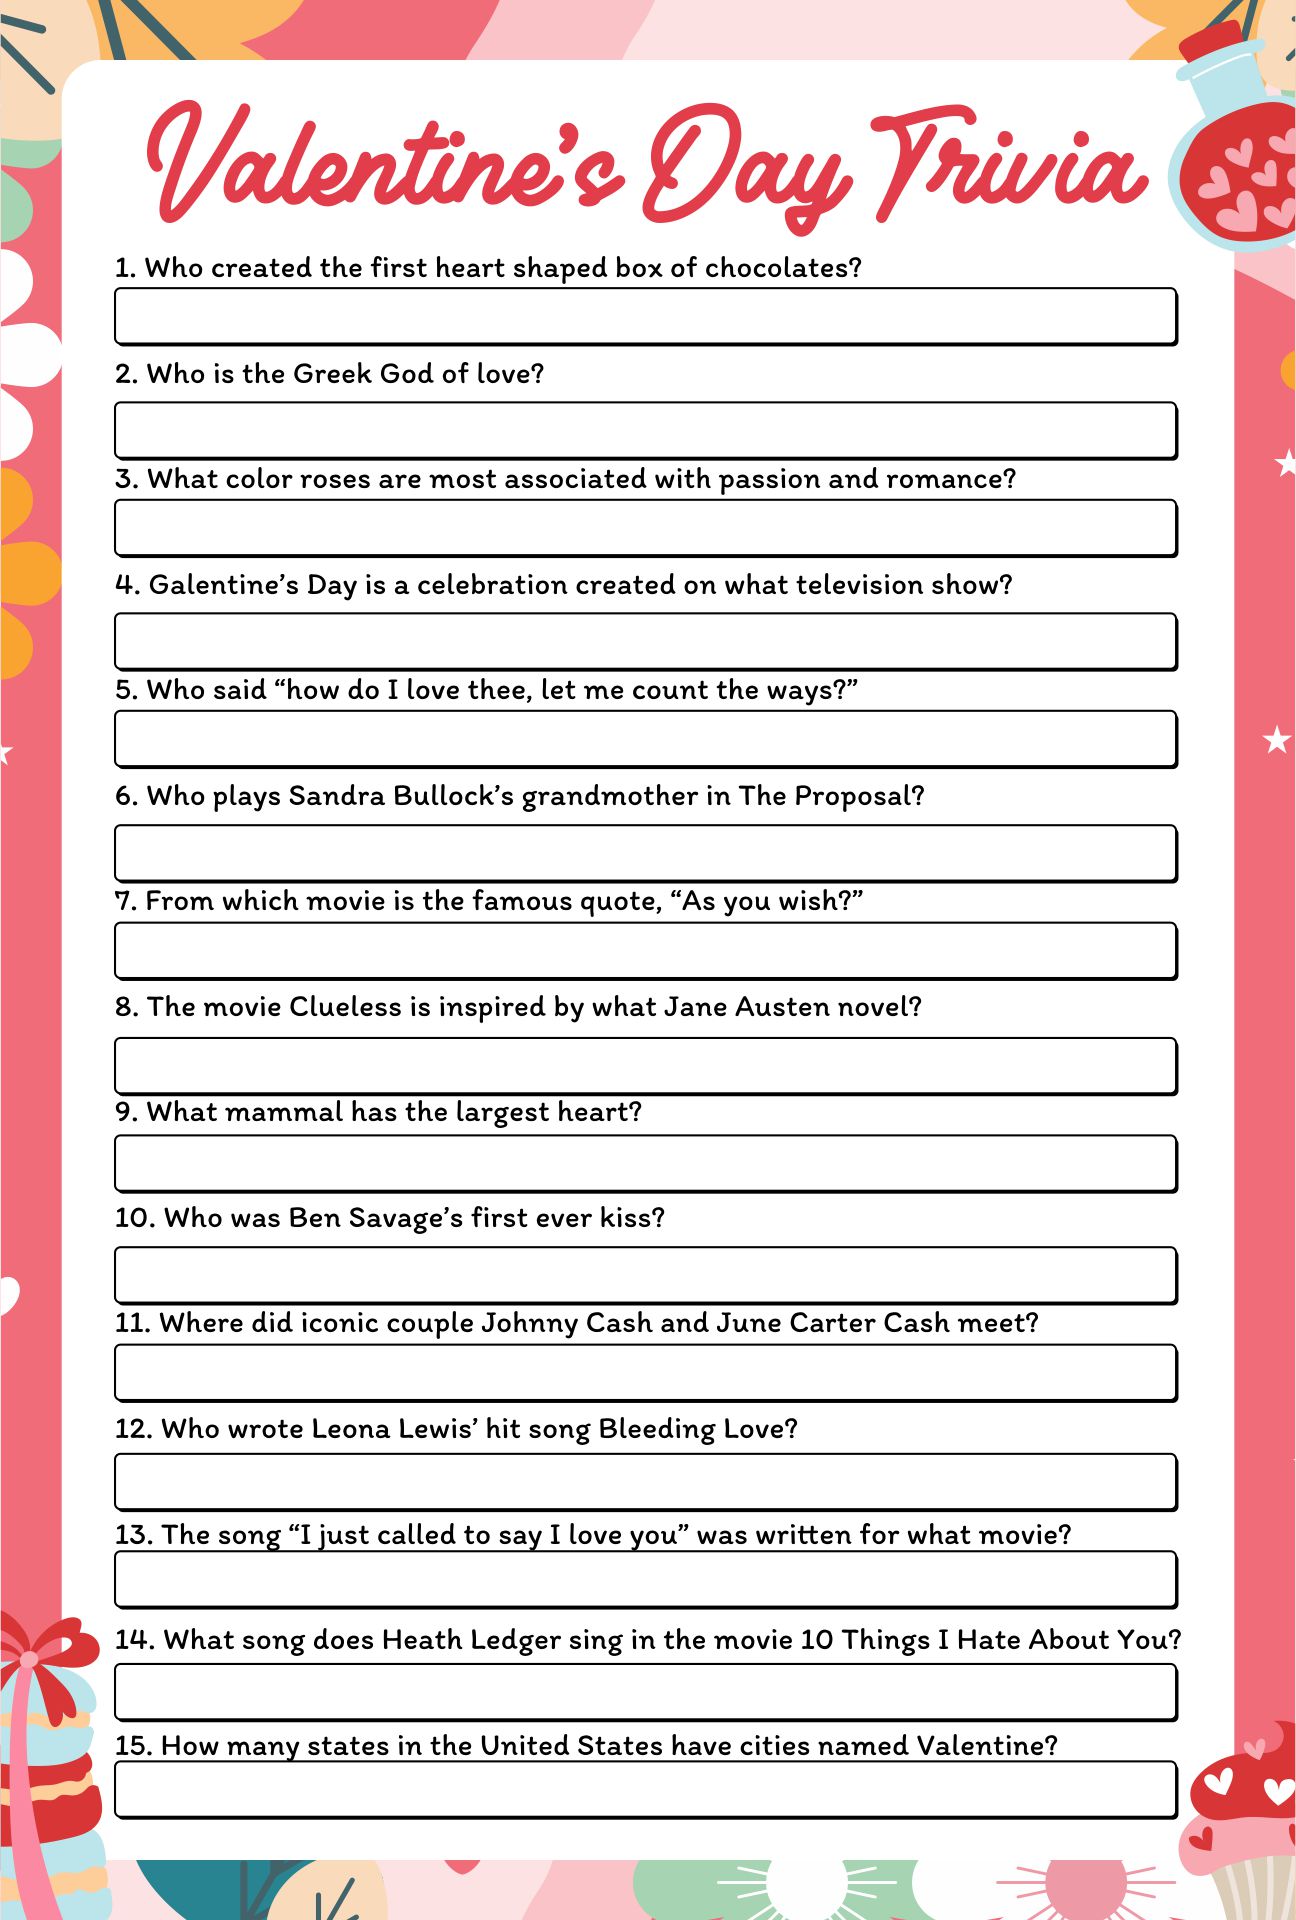 Valentines Day Trivia Questions